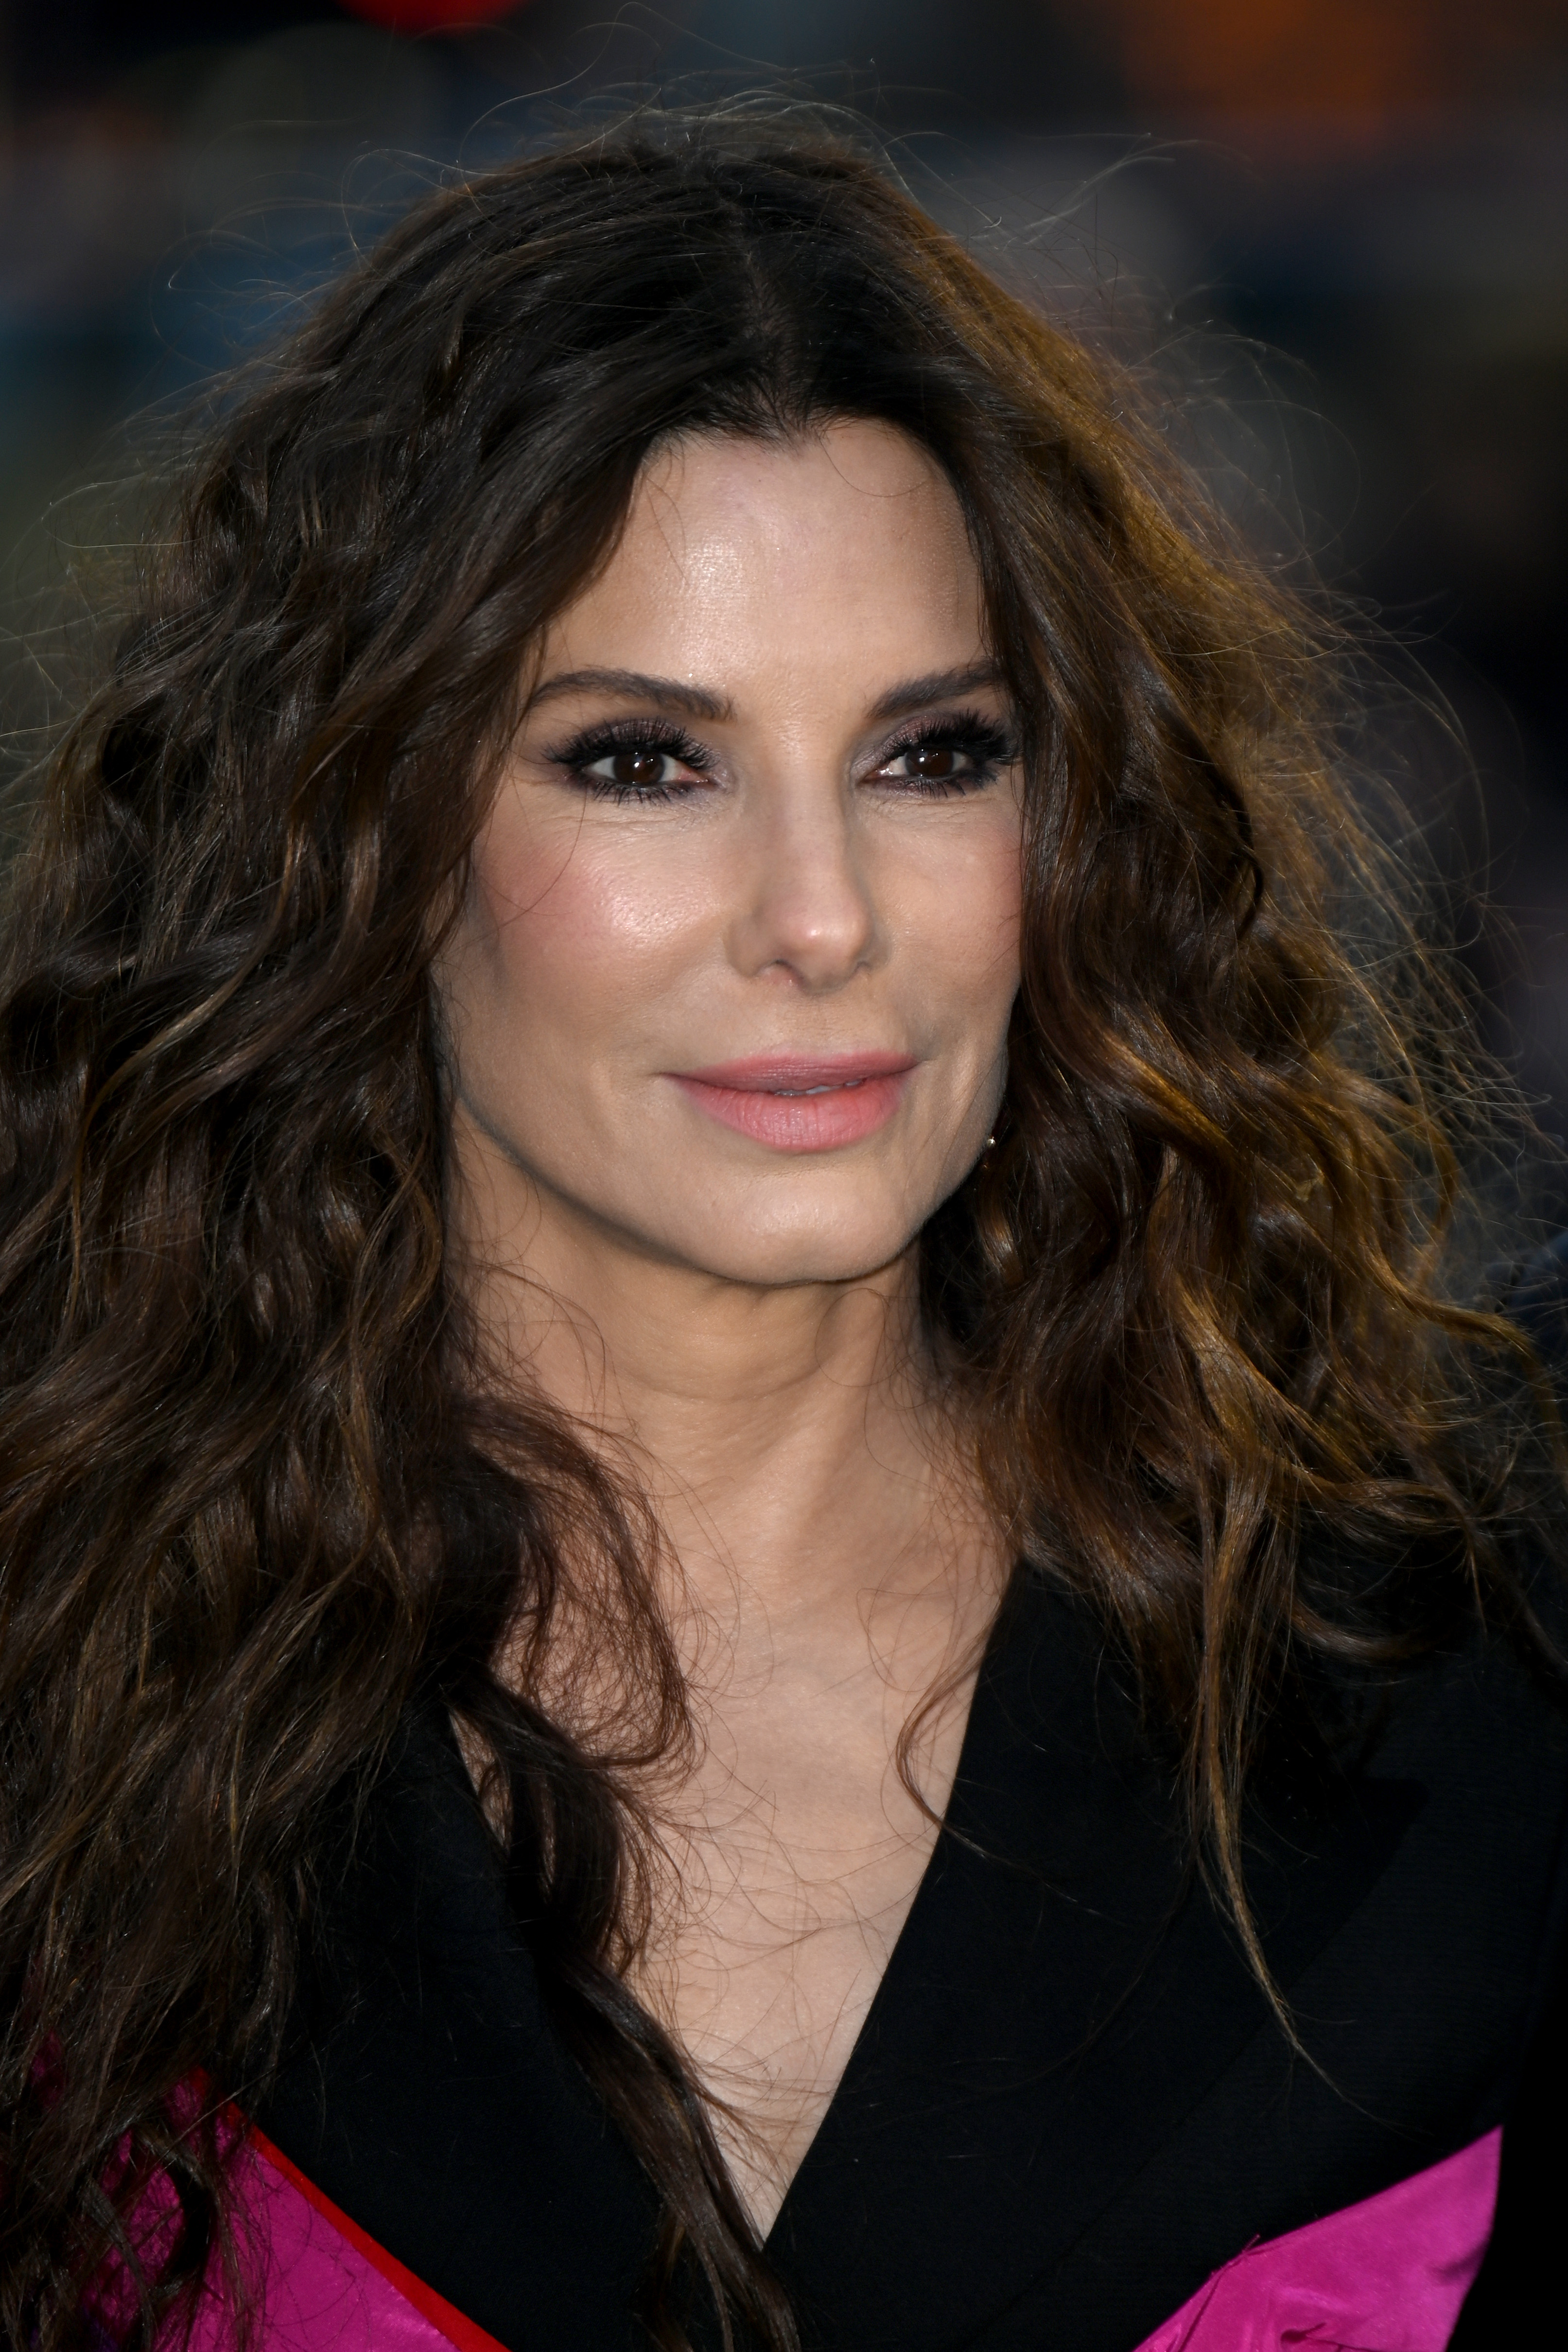 Sandra Bullock attends "The Lost City" UK screening on March 31, 2022 in London, England. | Source: Getty Images